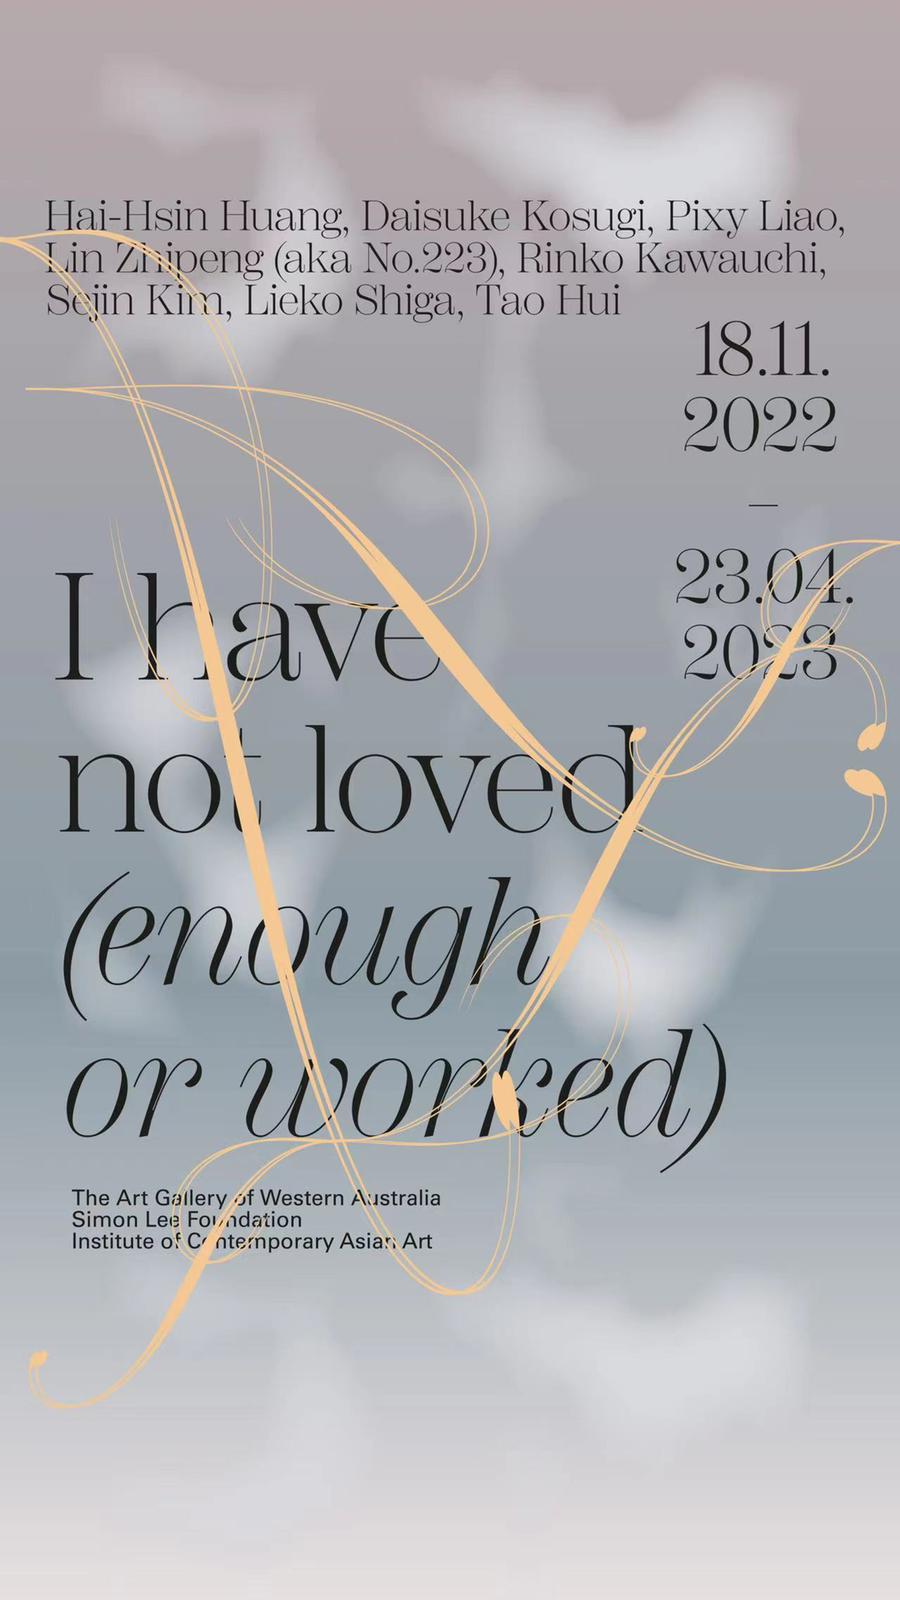 Pixy Liao participates in group exhibition “I have not loved (enough or worked)” in Art Gallery of Western Australia